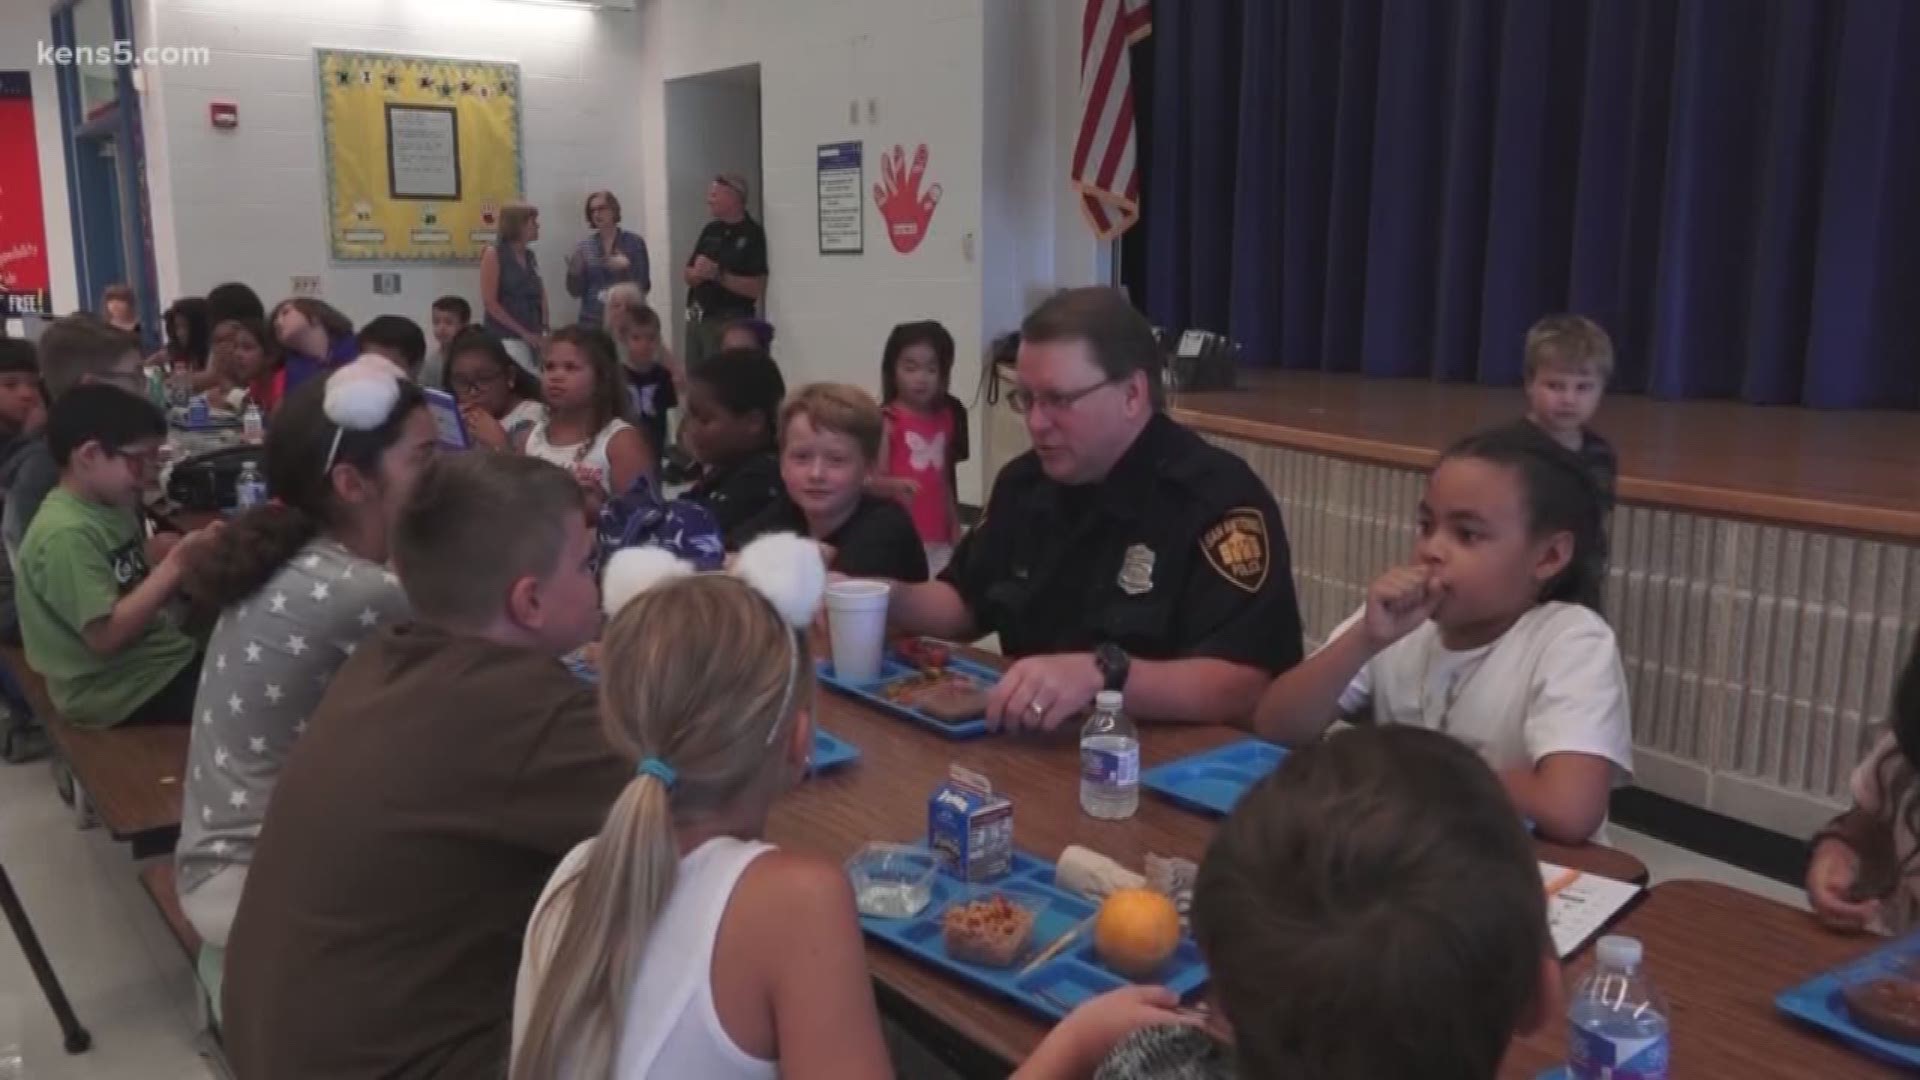 This year, a San Antonio school district hopes to get more students face to face with police officers in a good way. Eyewitness News reporter Erica Zucco has more.